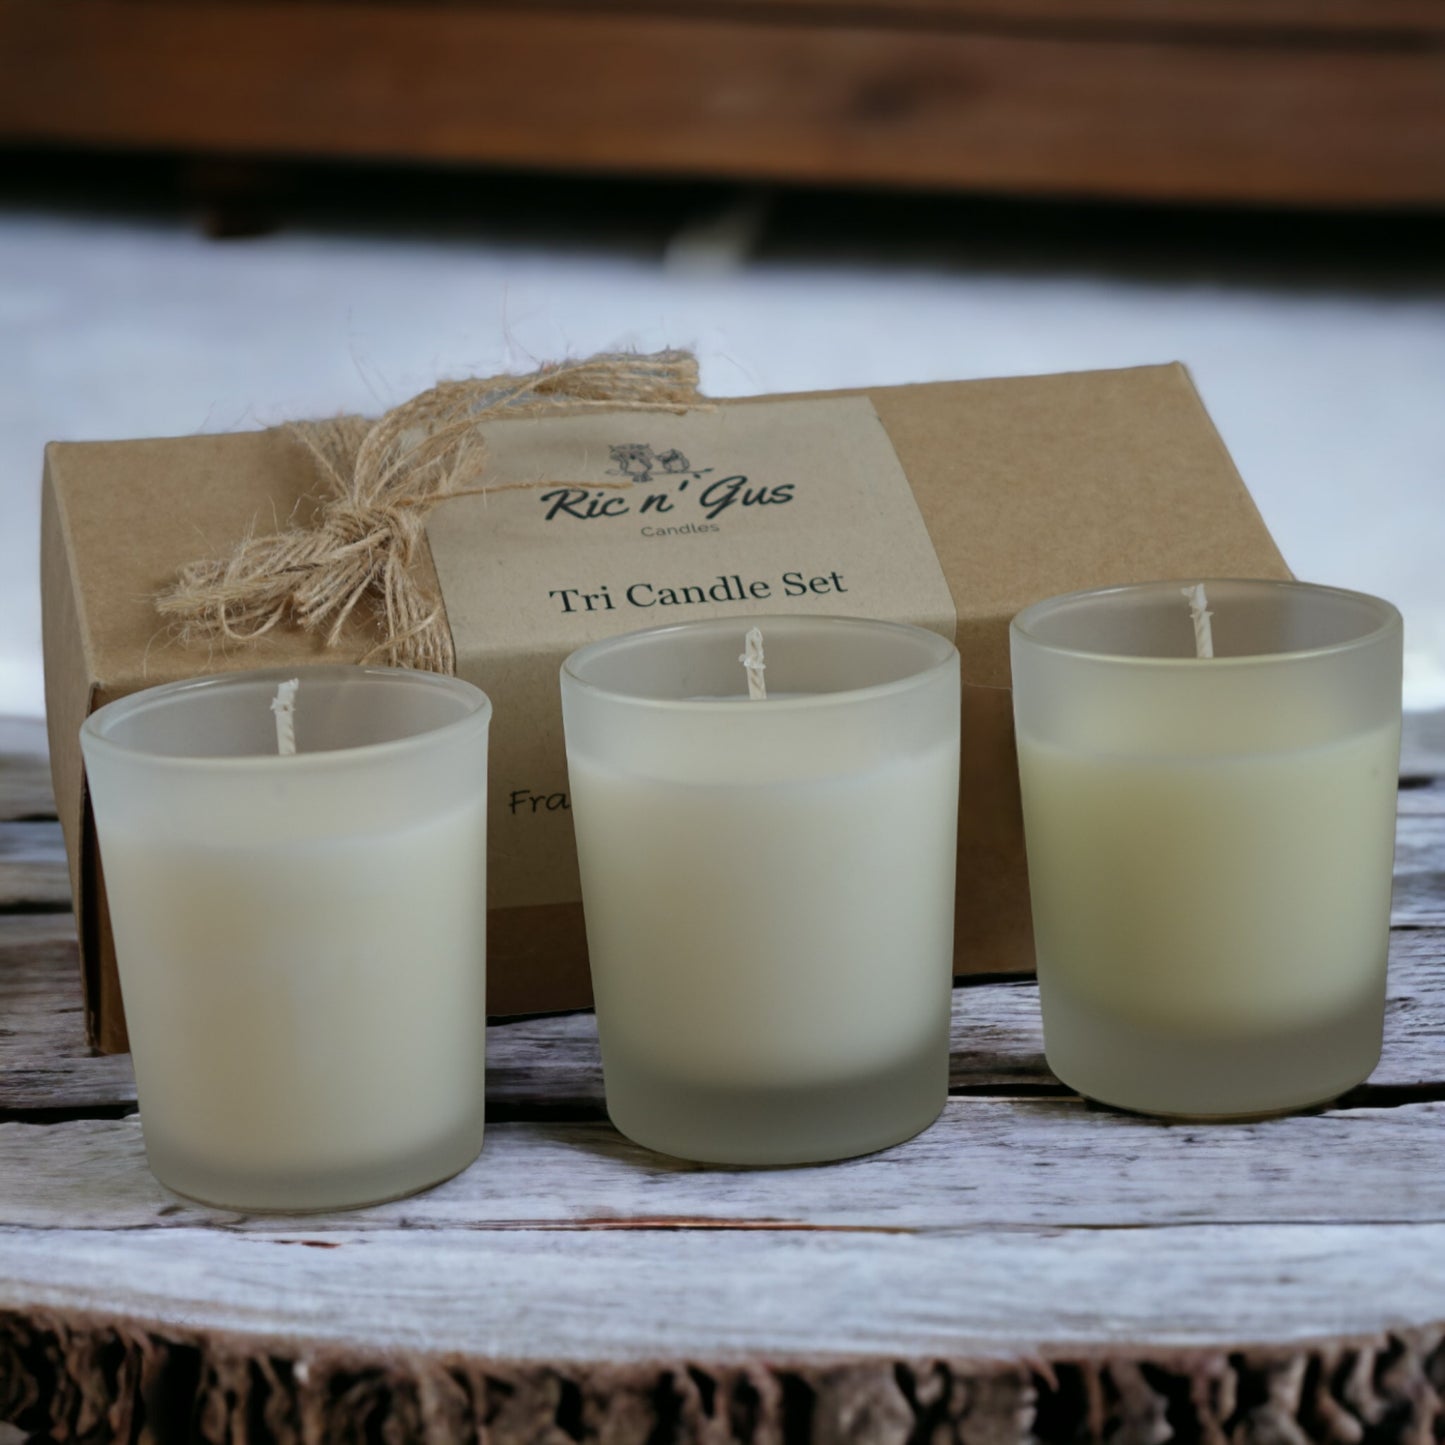 ricn_gus candles trio scented candle Christmas gift set _7